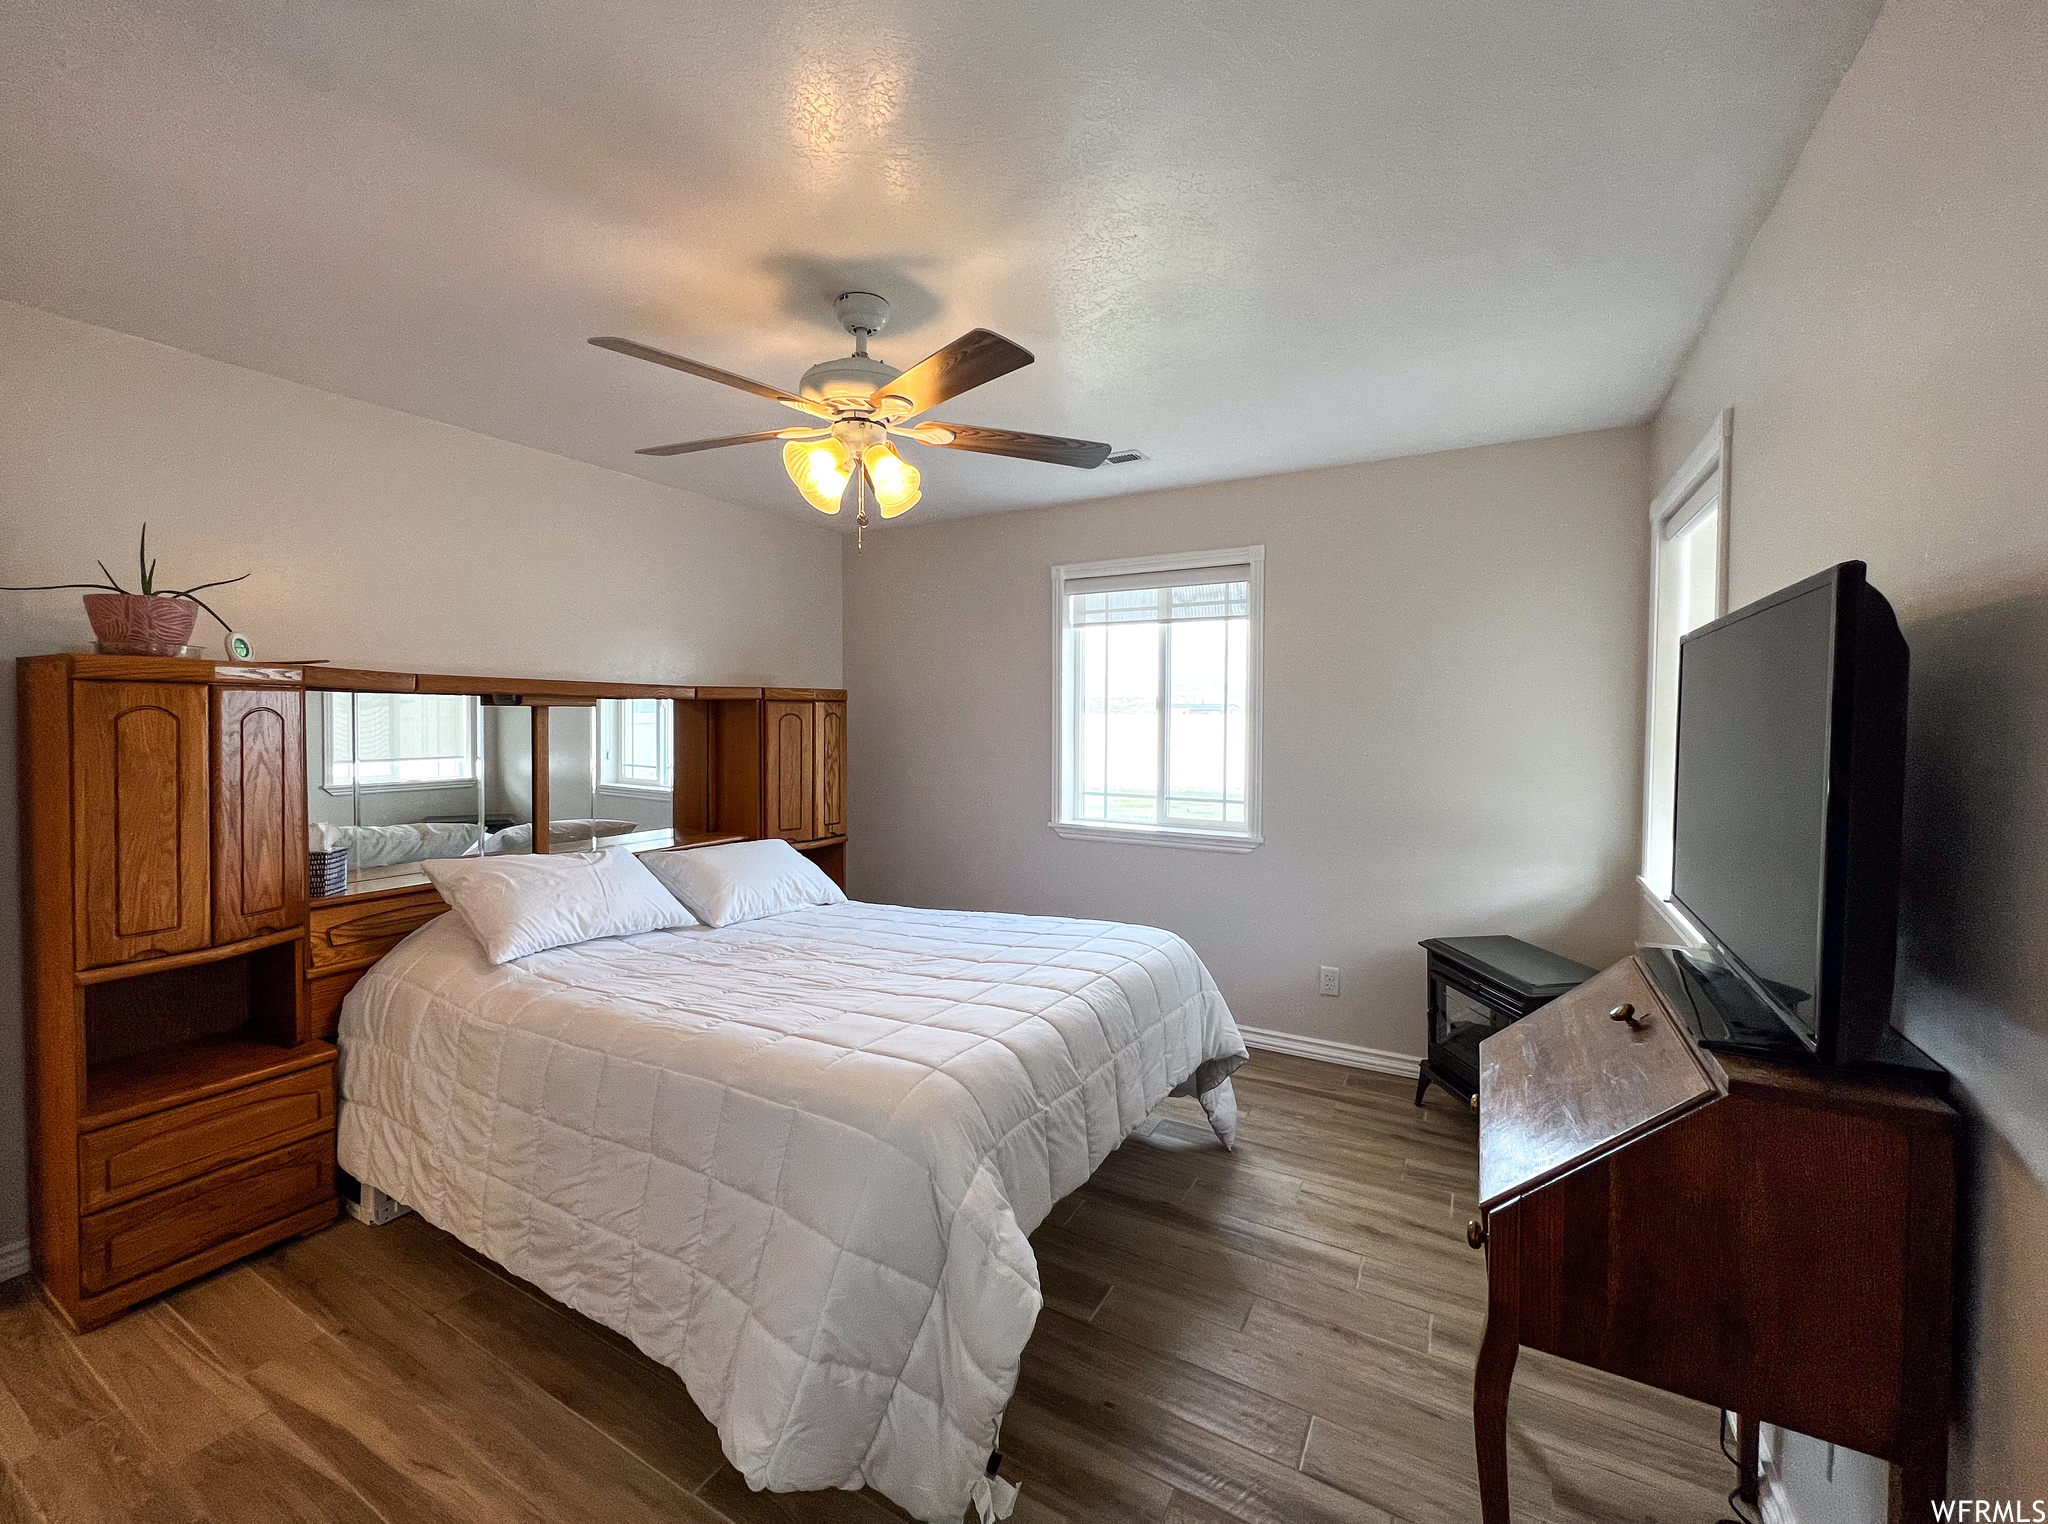 Bedroom featuring a ceiling fan and natural light